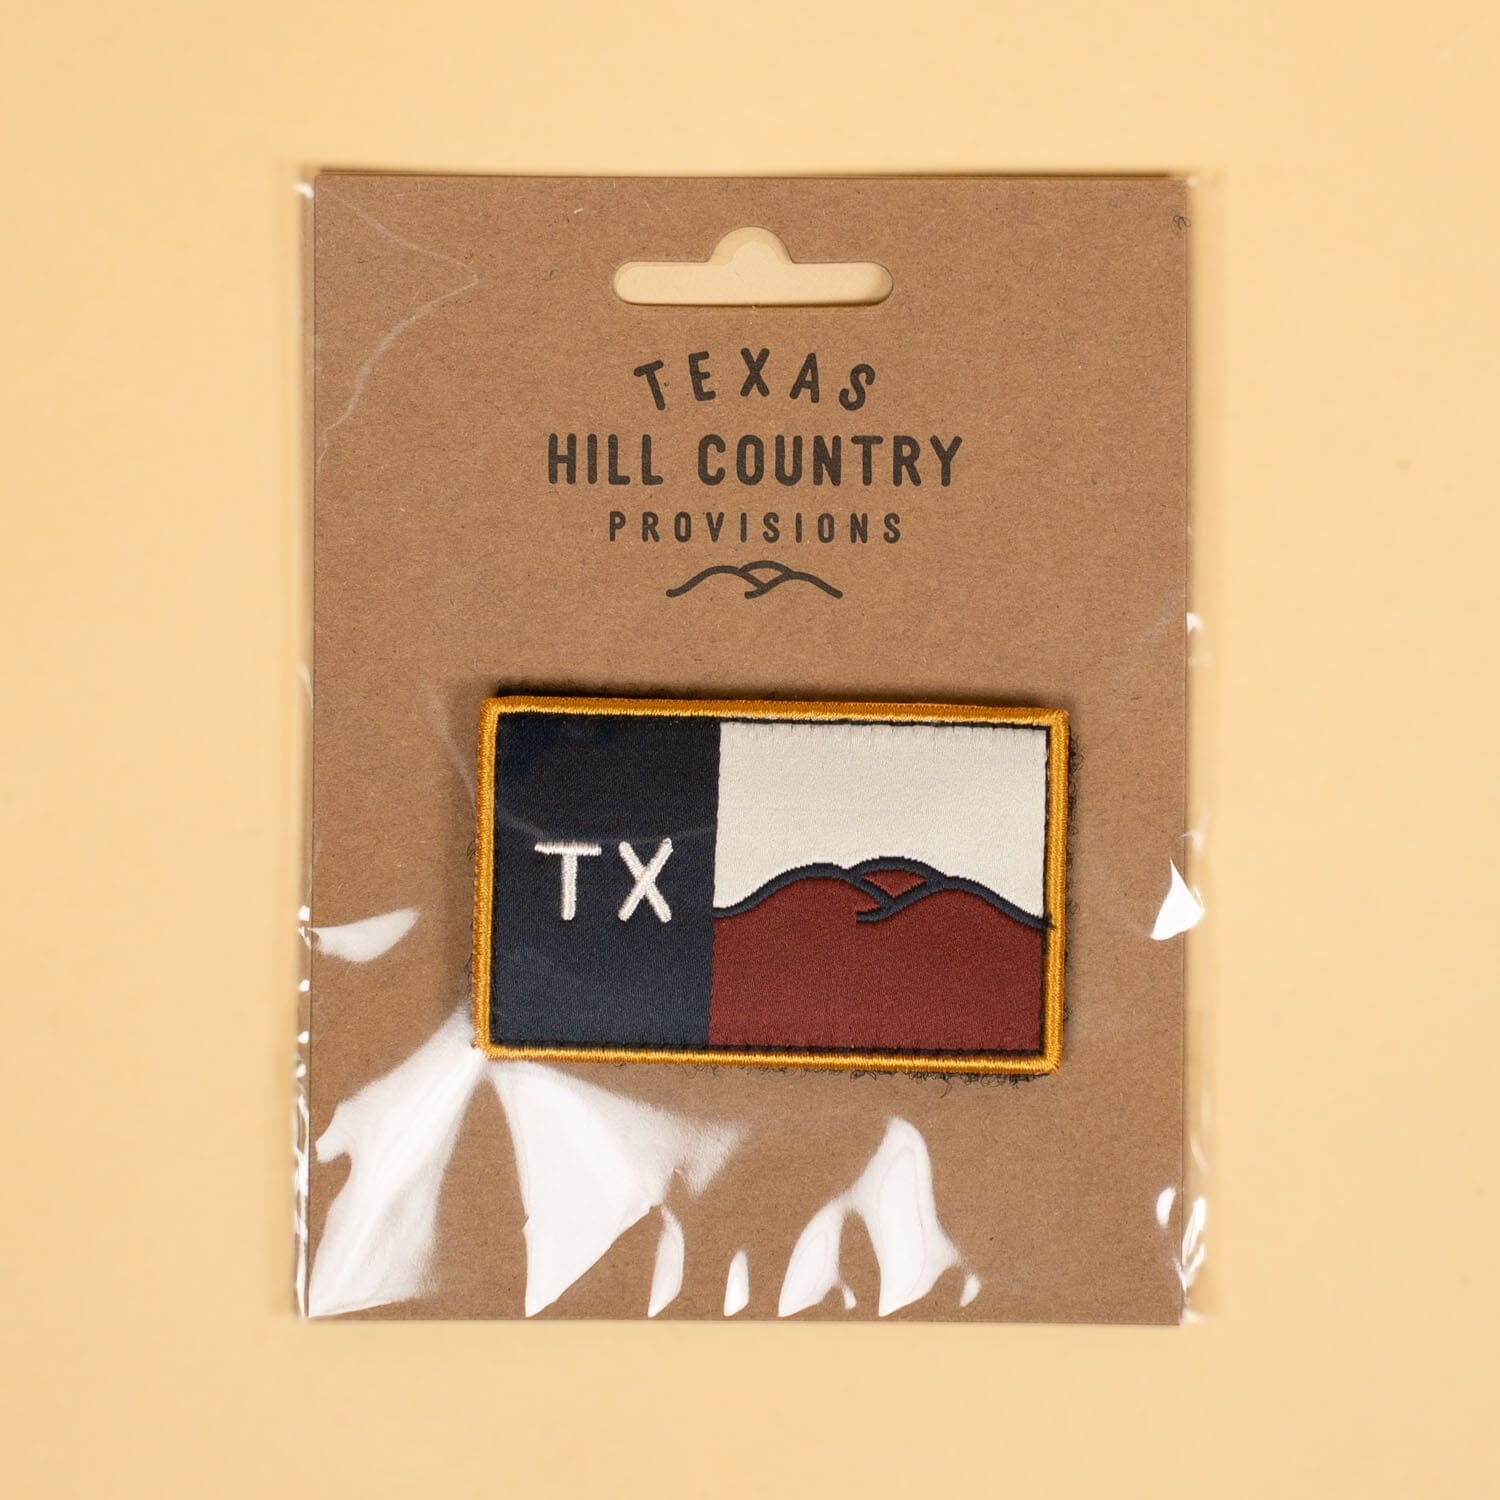 Hill Country Flag Patch Texas Hill Country Provisions 